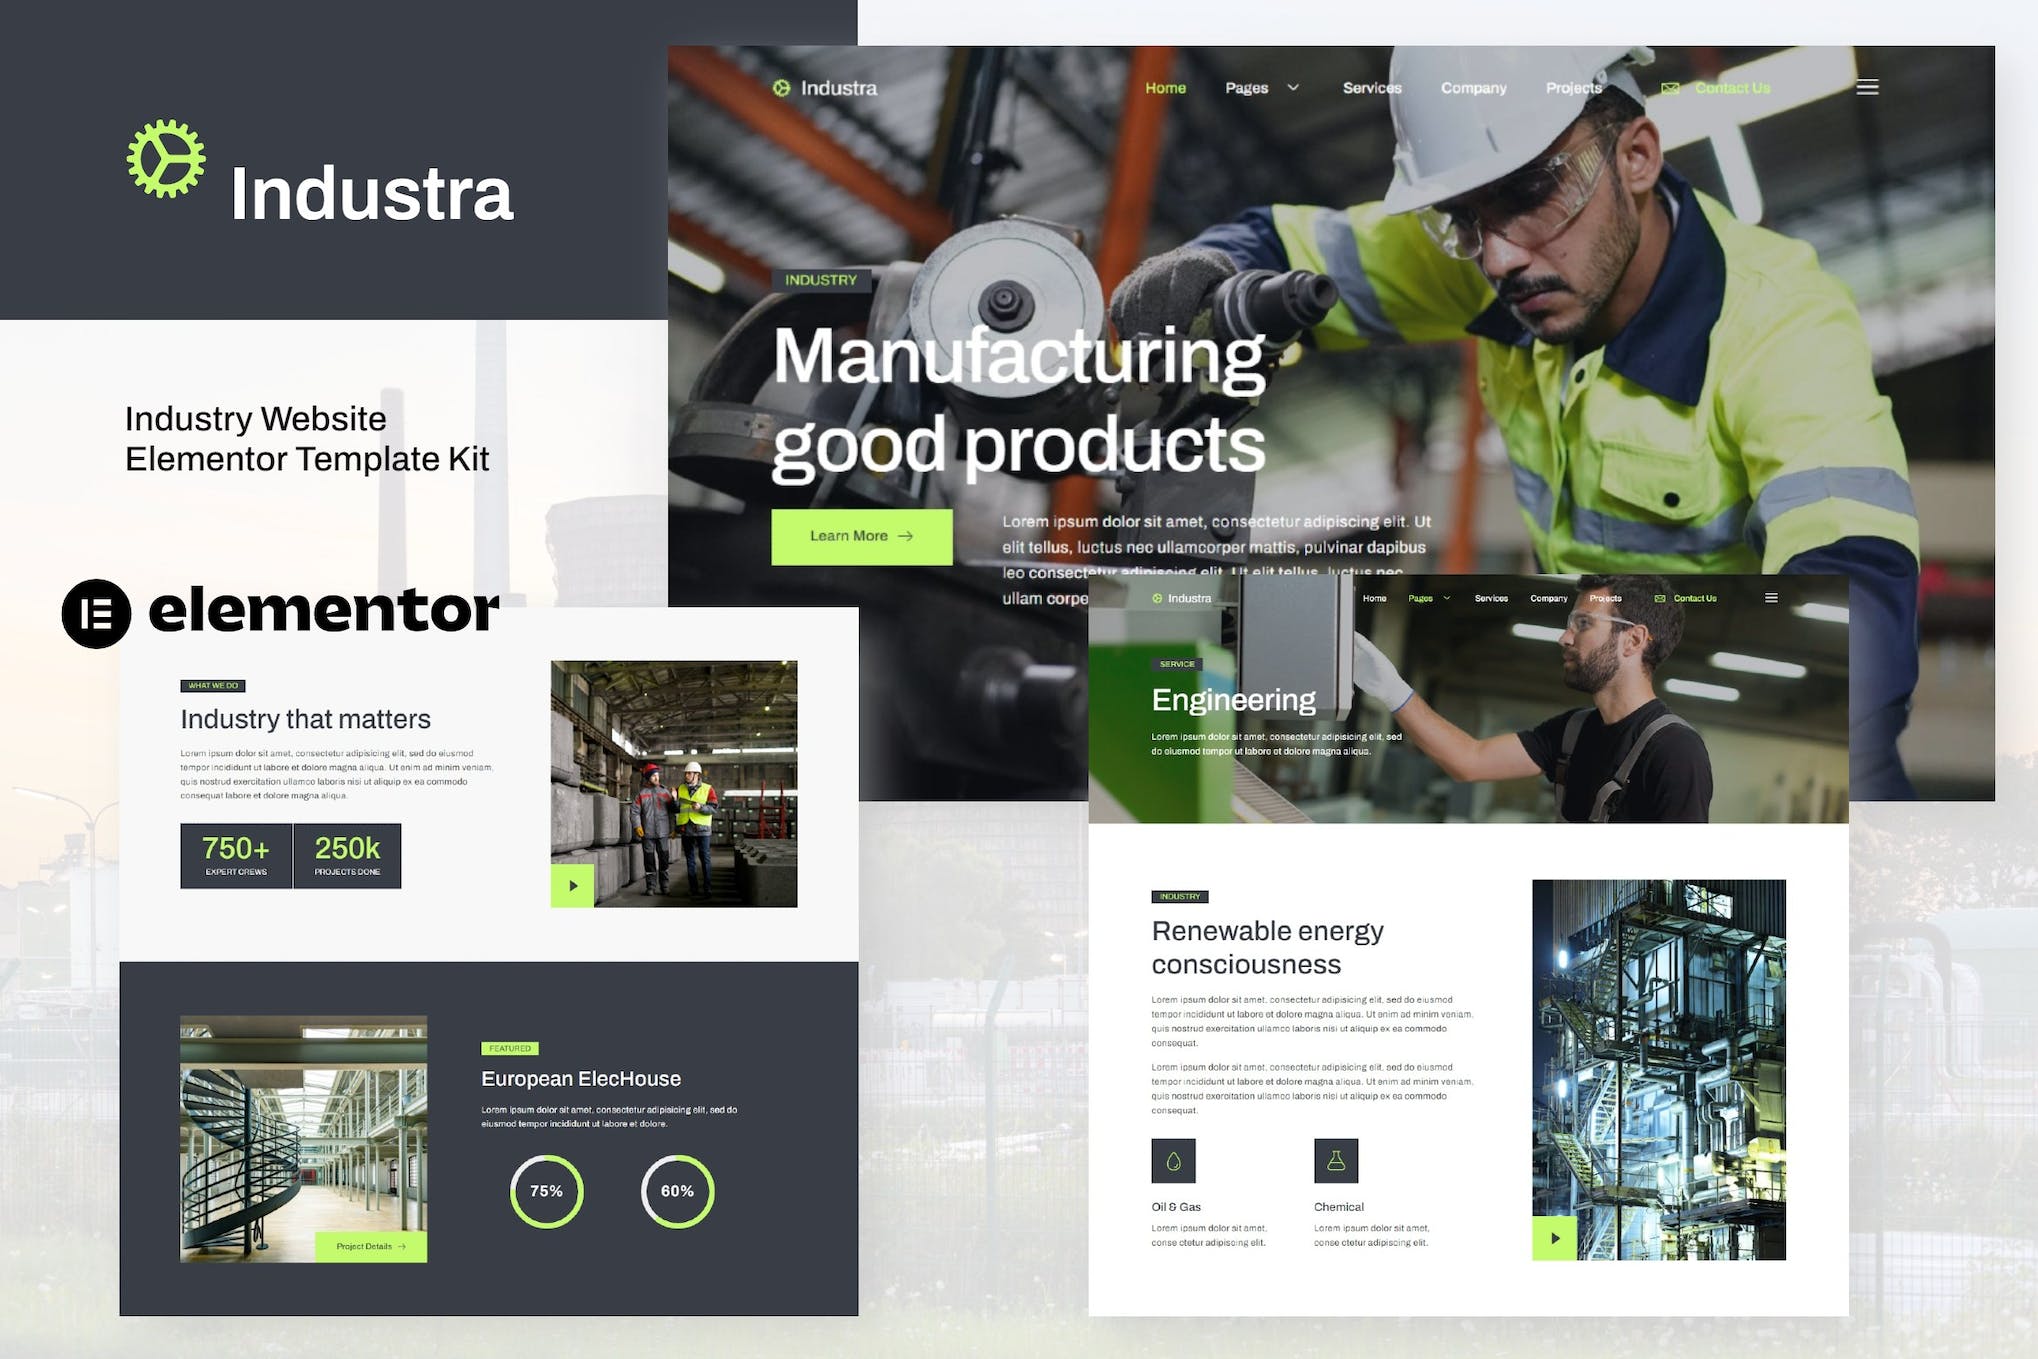 Industra - Industry & Manufacturing Elementor Template Kit